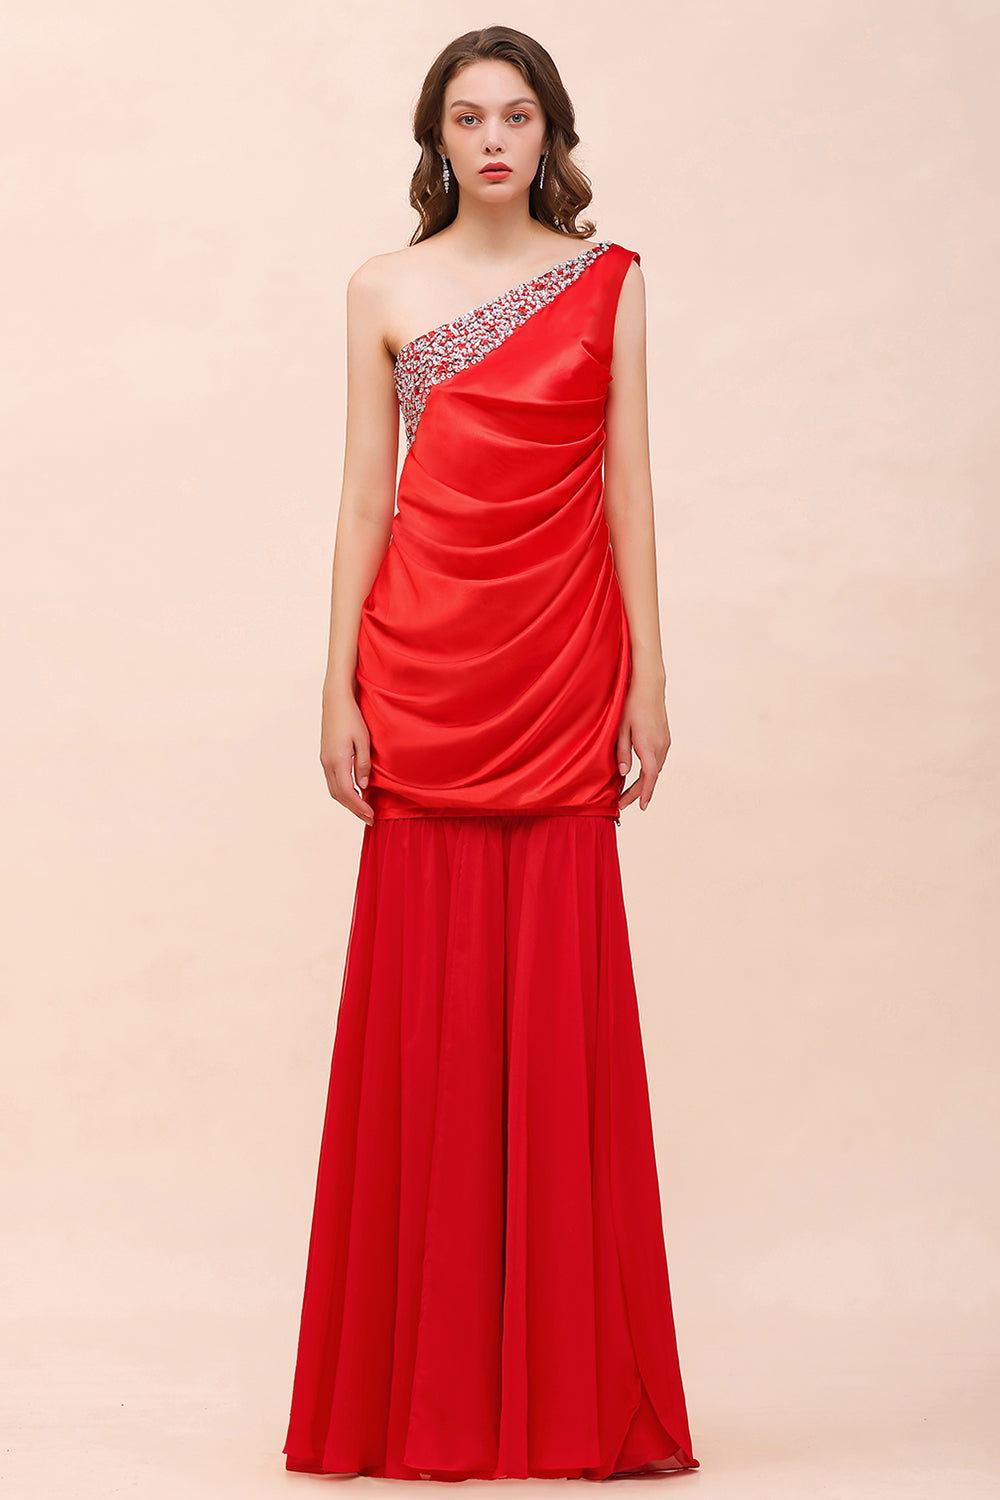 Chic One Shoulder Beading Ruffle Red Bridesmaid Dress with Detachable Skirt